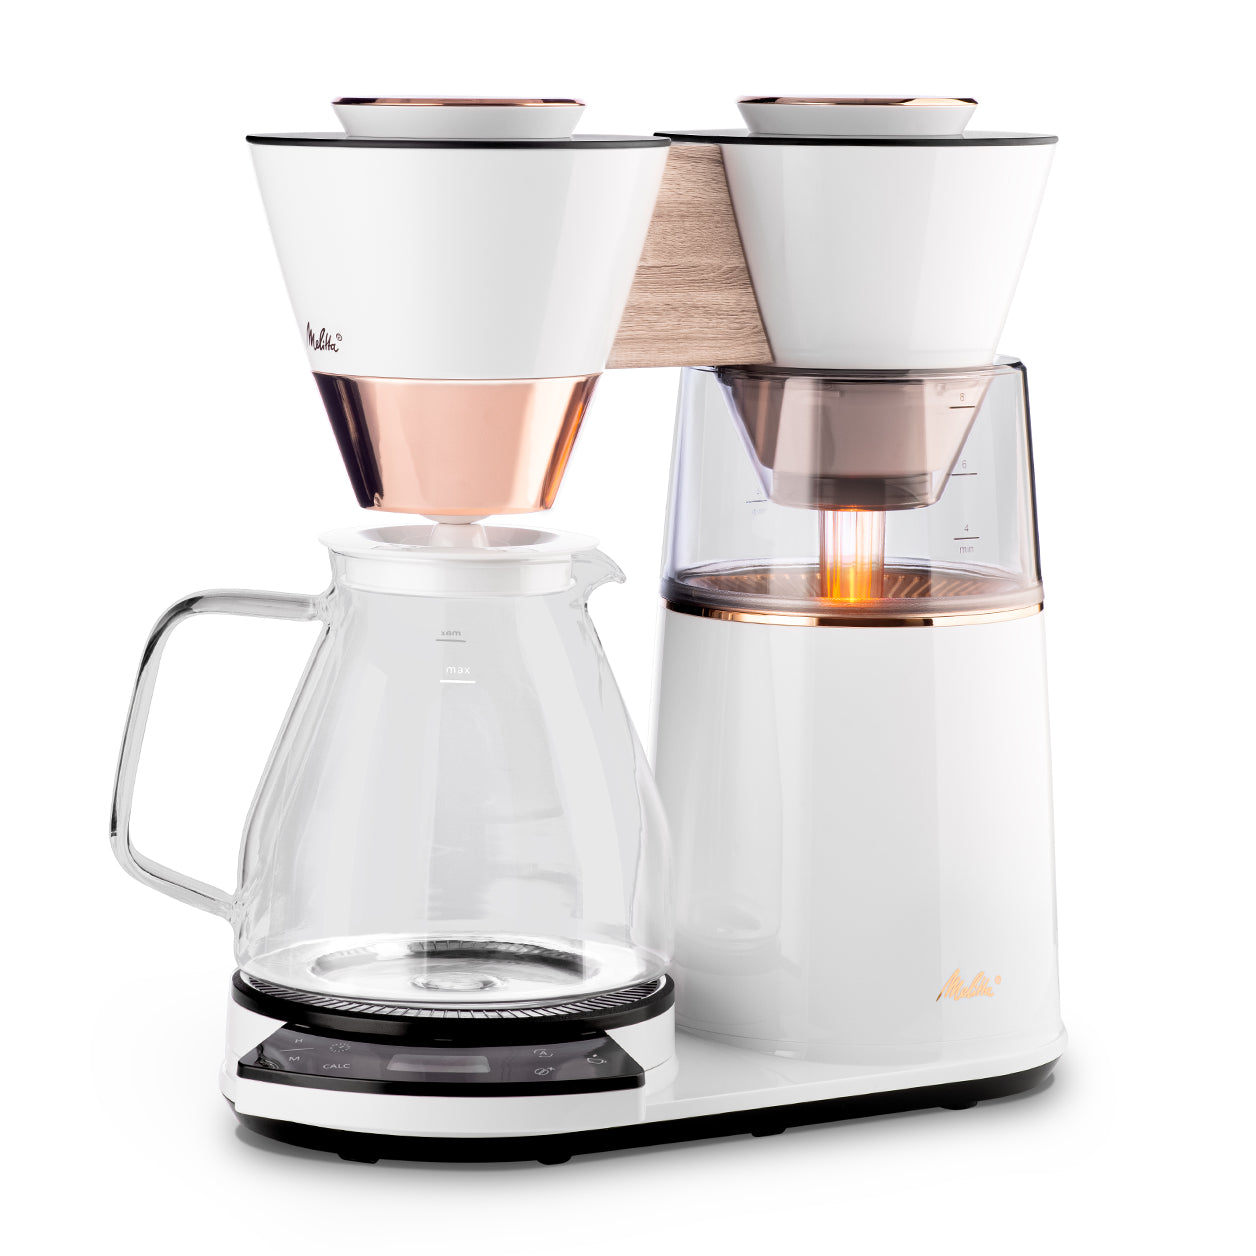 Melitta Drip Coffee Maker with Thermal Carafe - White, 10 c - Pay